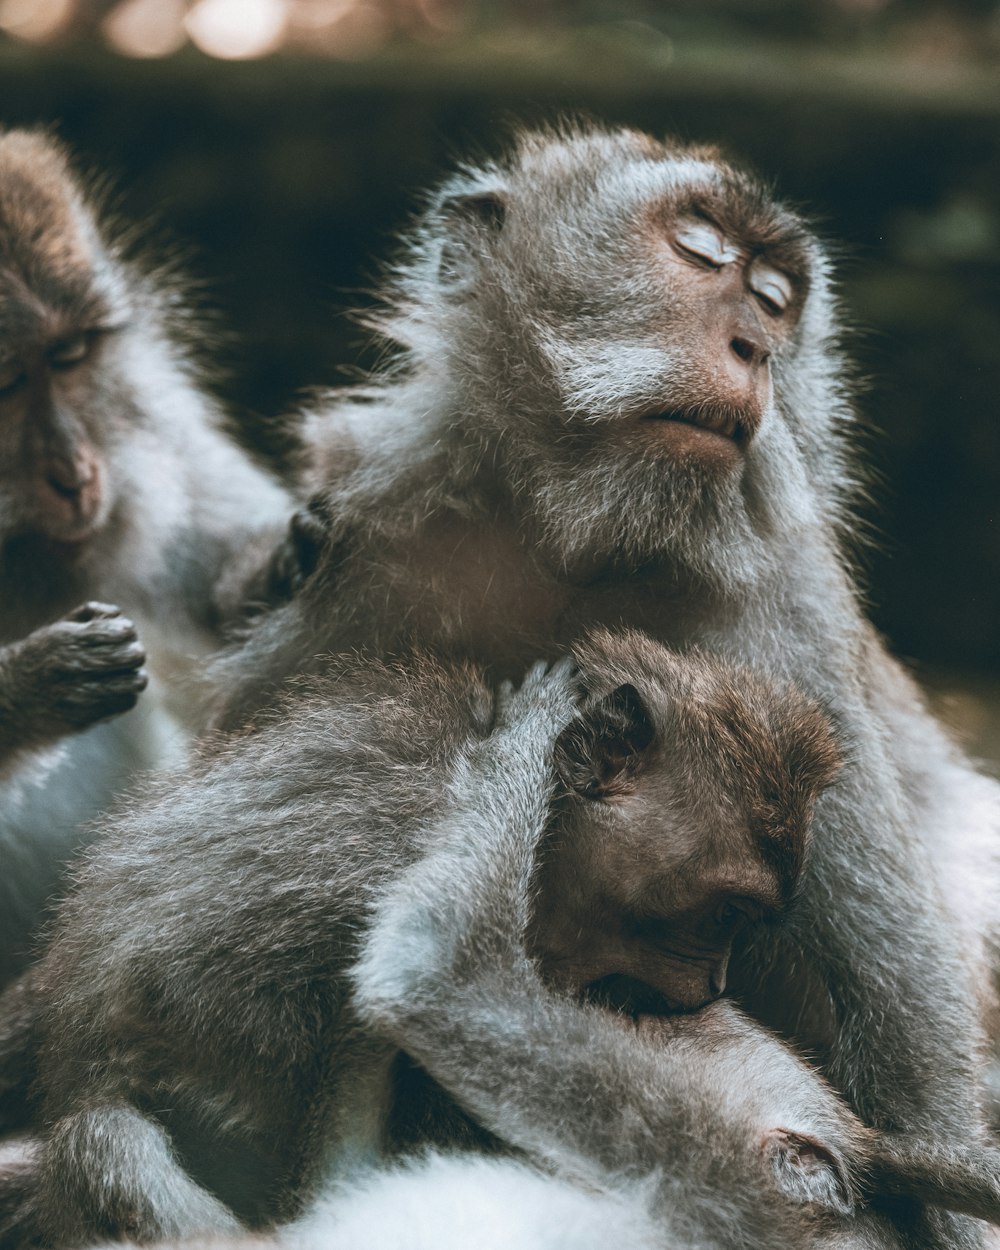 a group of monkeys sitting on top of each other